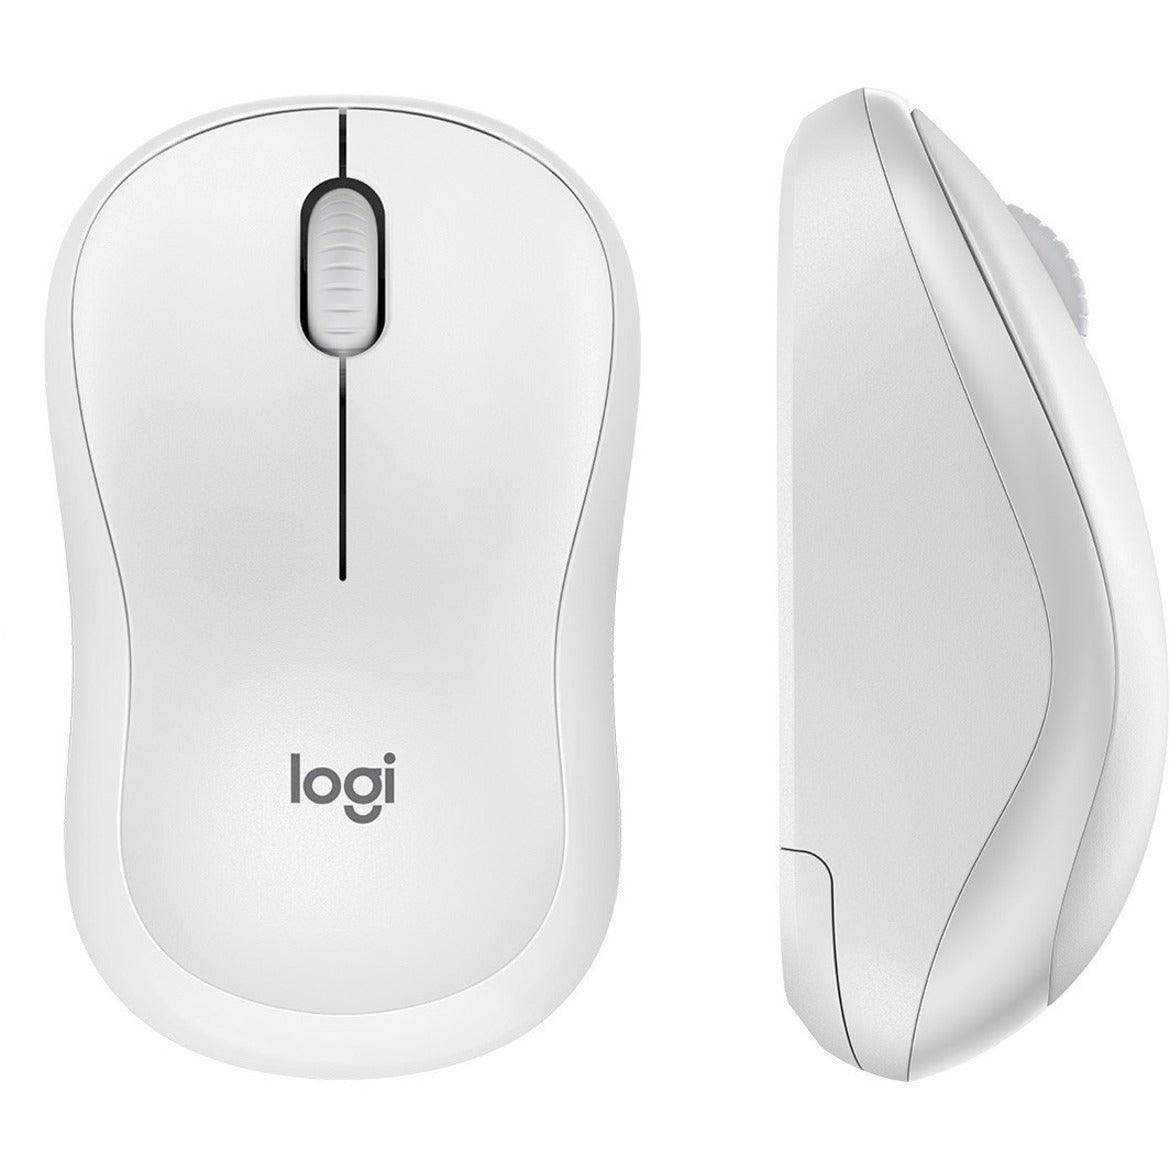 Logitech 910-006125 M220 Silent Wireless Mouse, 2.4 GHz with USB Receiver, 1000 DPI Optical Tracking, 18-Month Battery, Ambidextrous, Off-white